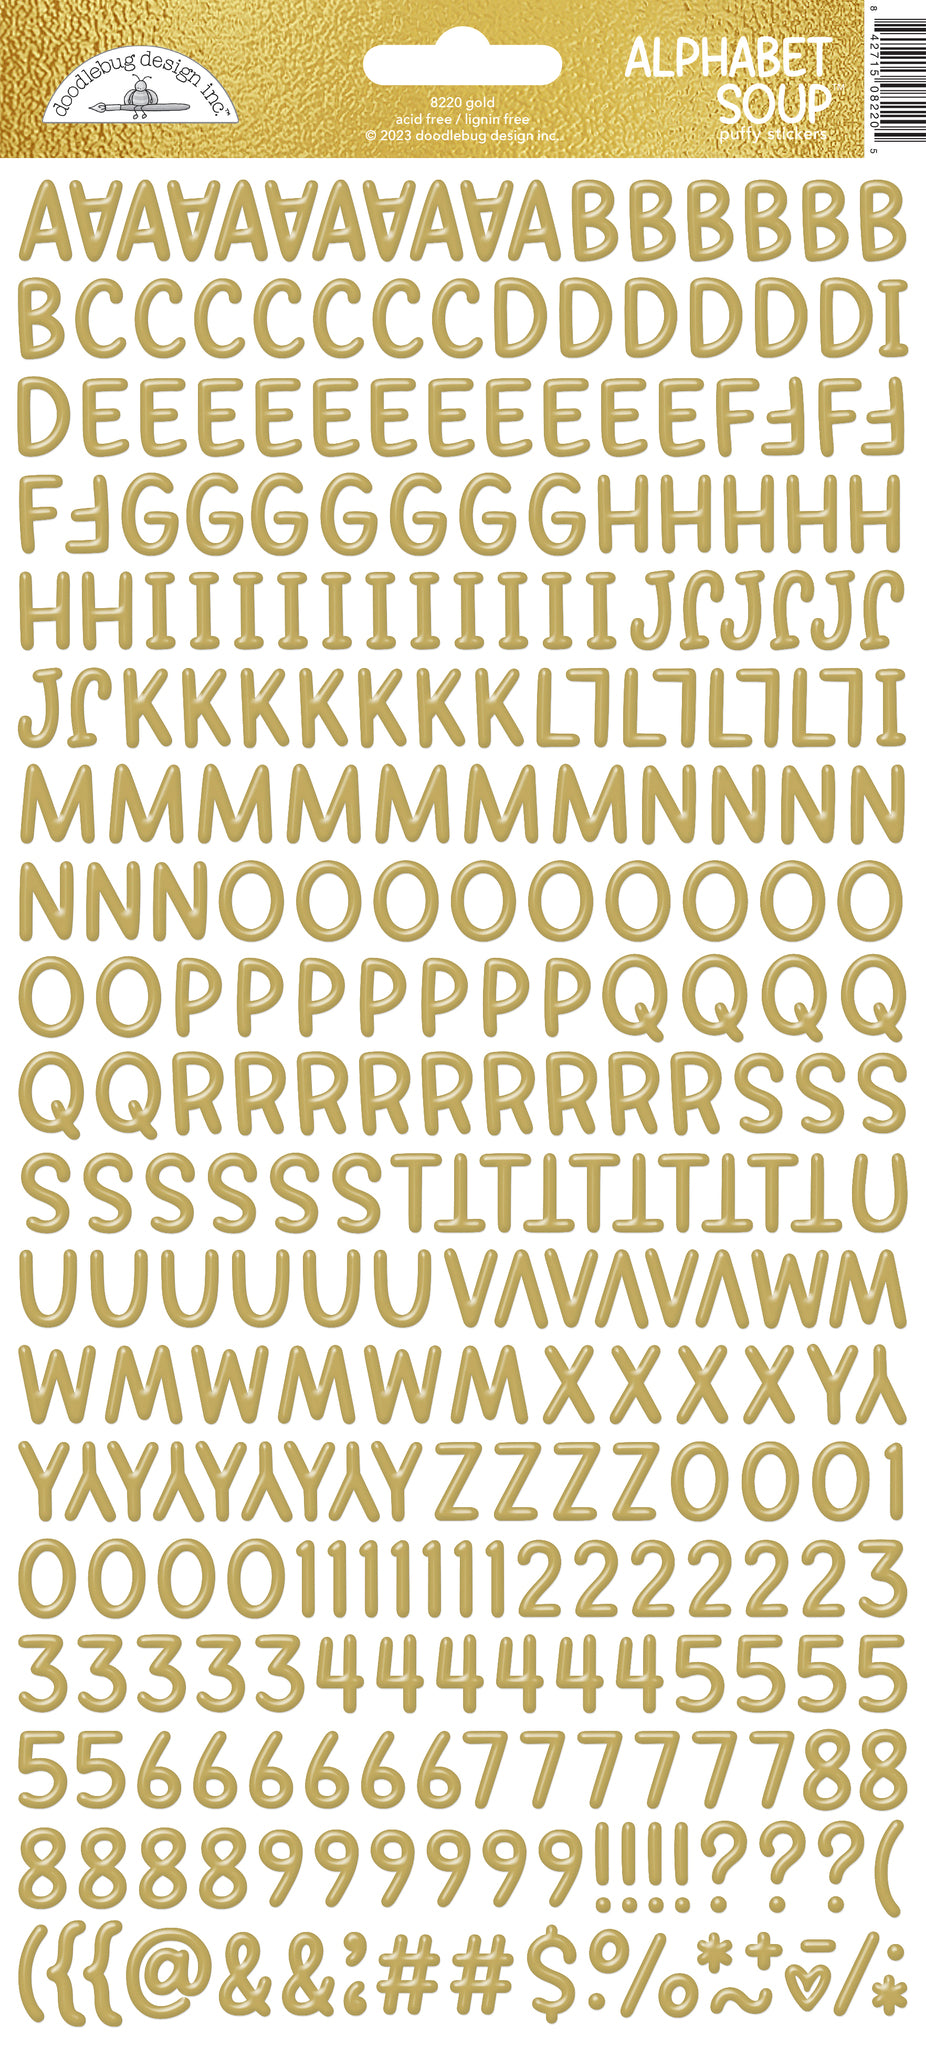 Gold Alphabet Soup Puffy Stickers